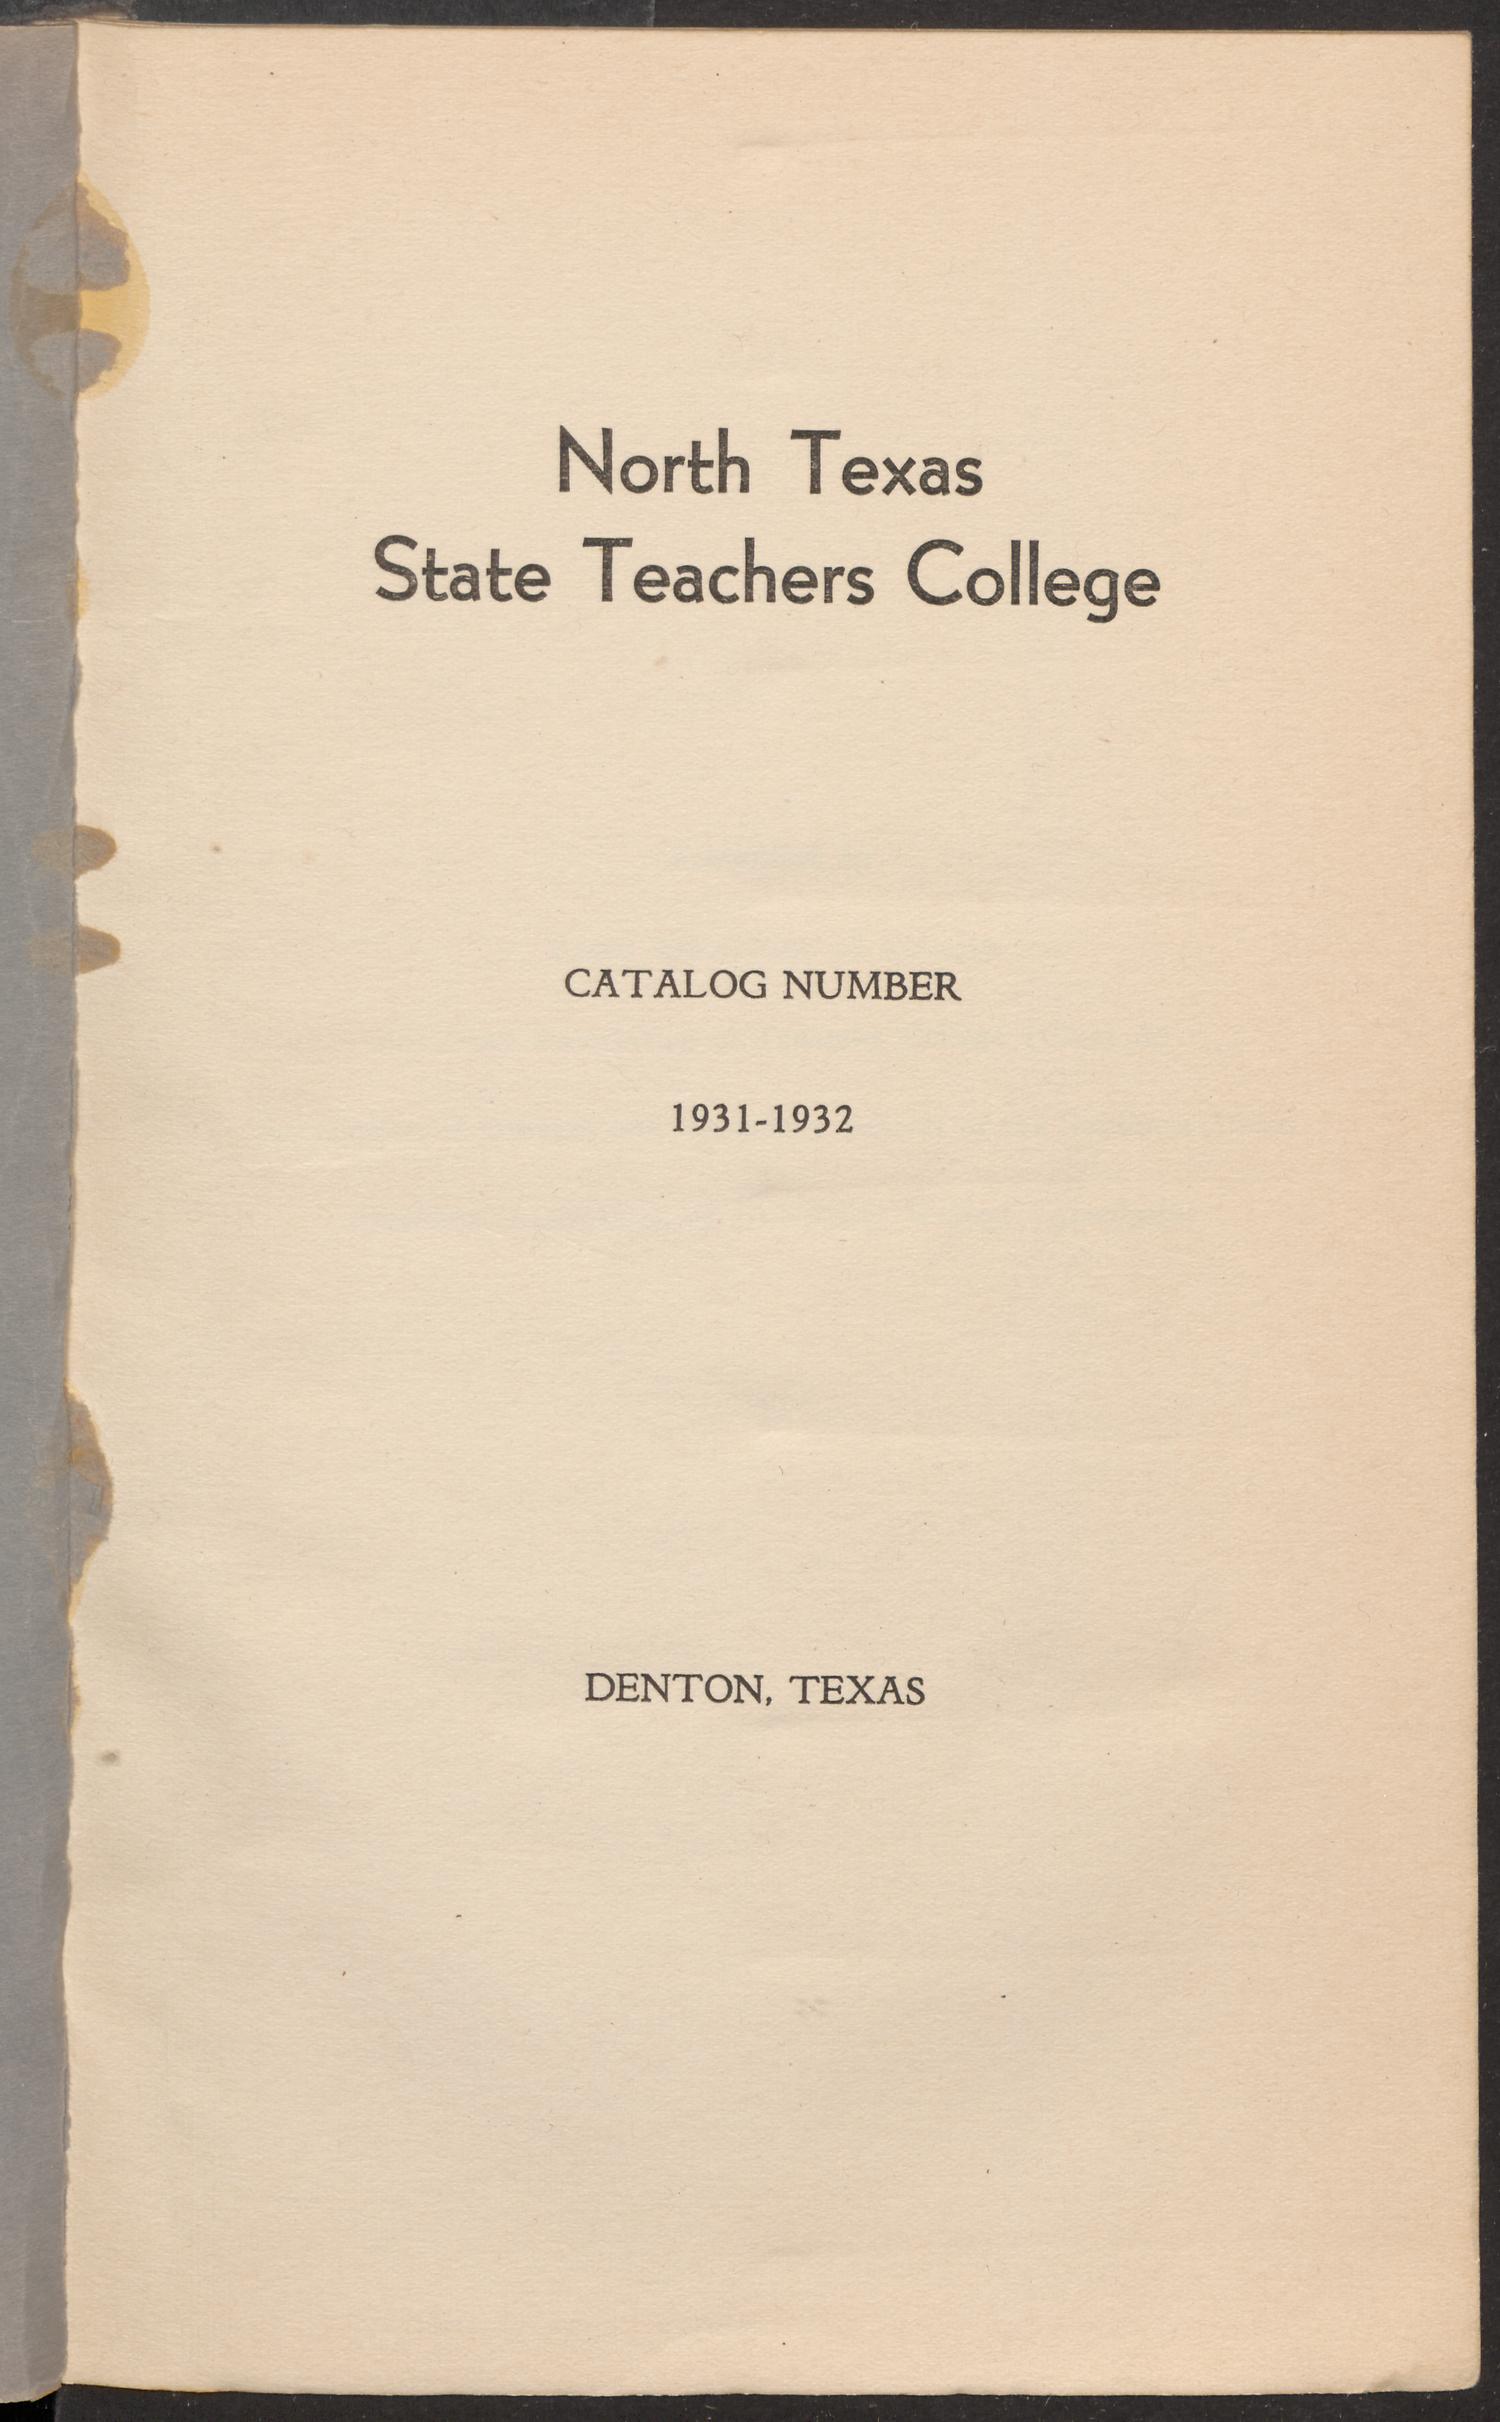 Catalog of North Texas State Teachers College: 1931-1932
                                                
                                                    Title Page
                                                